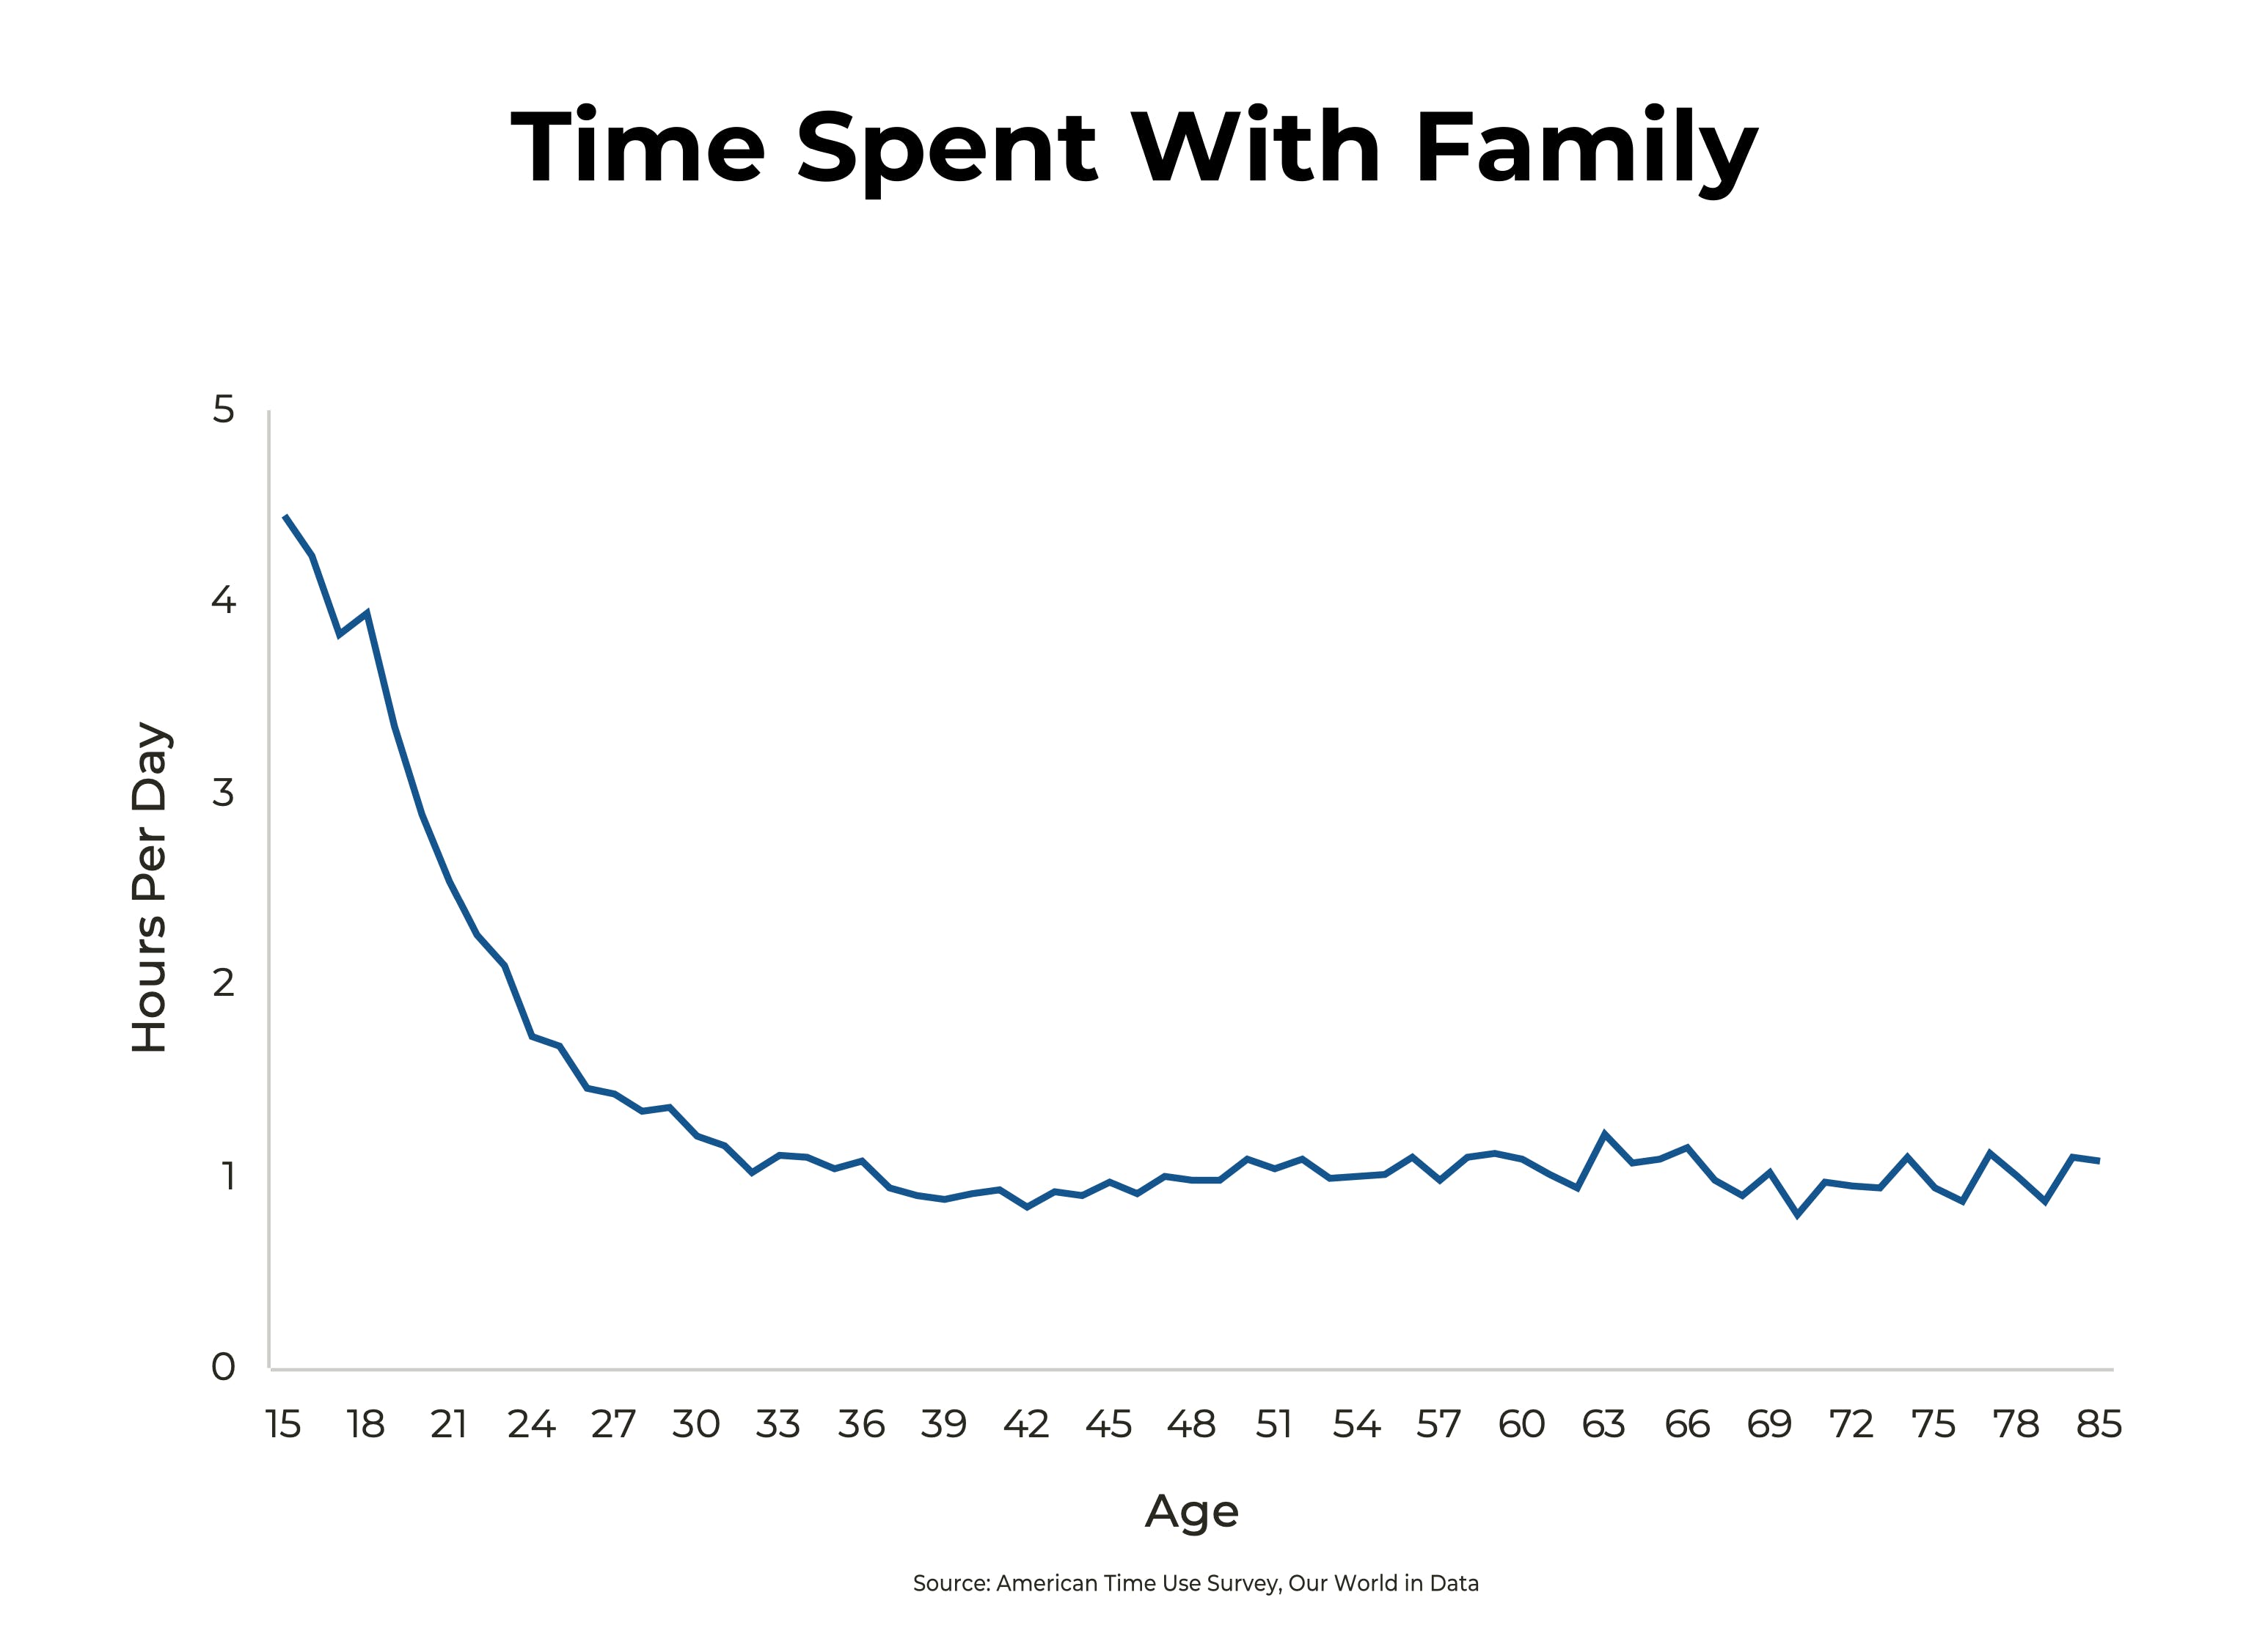 Our time spent with family